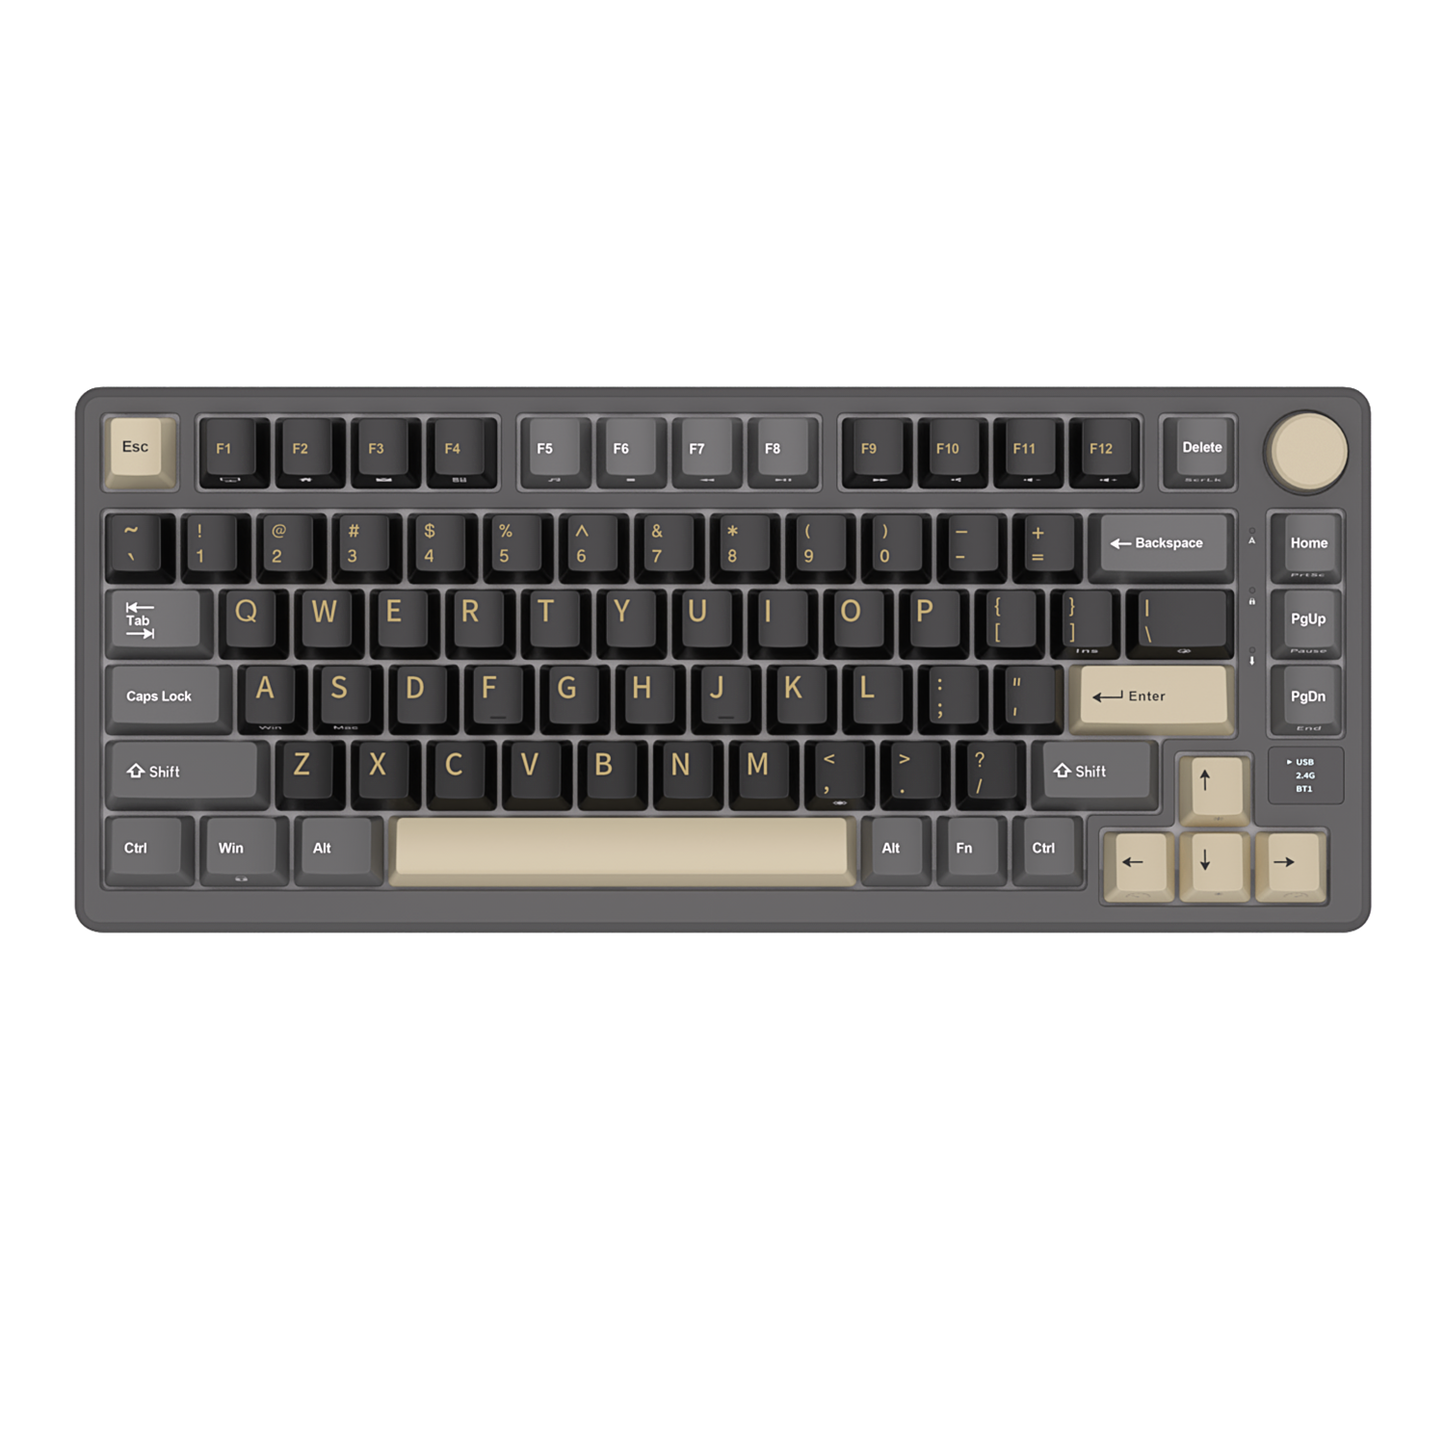 Royal Kludge M75 (RKM75) Phantom without RGB, black, grey and off-white color scheme. 